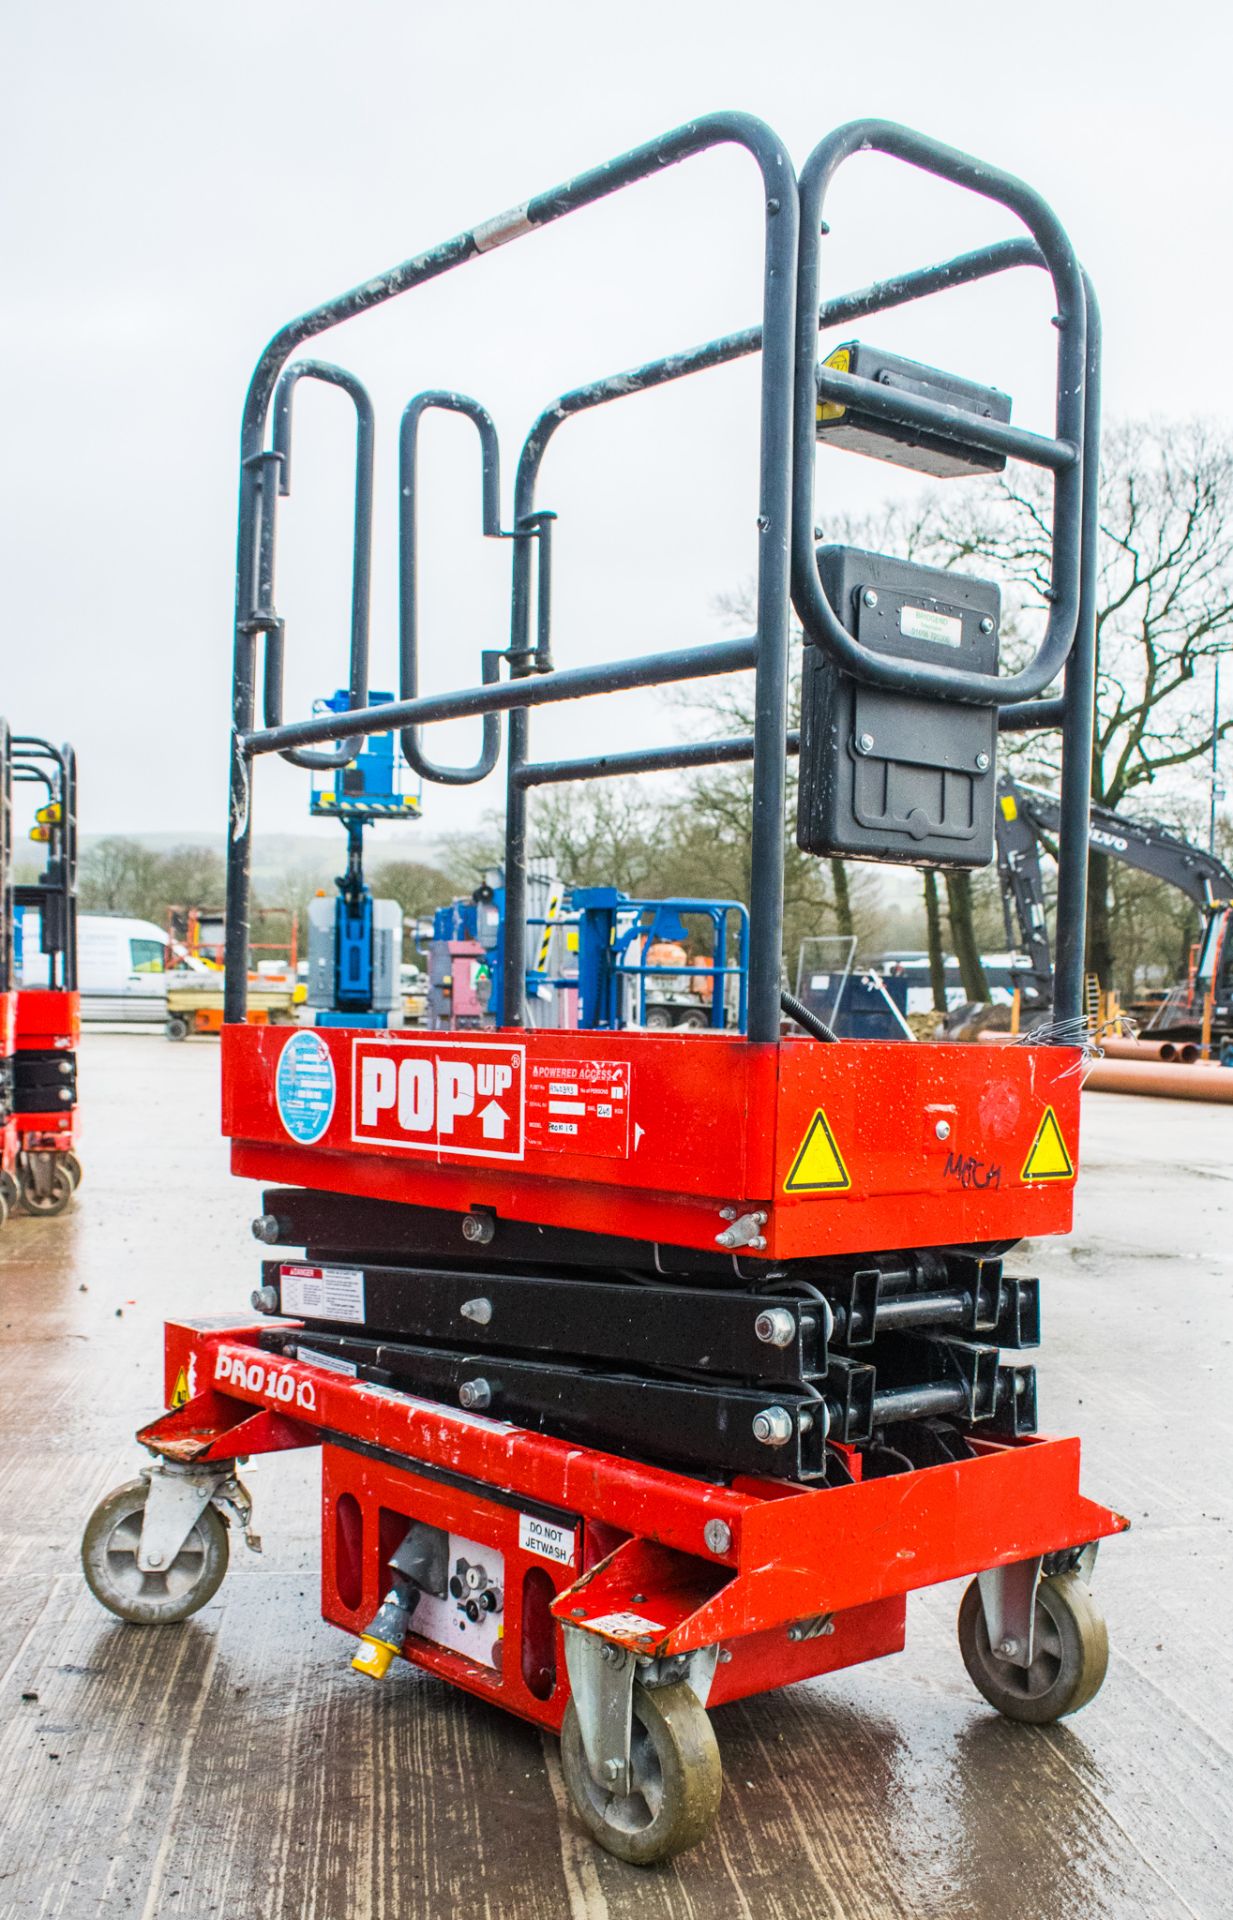 Pop-up PRO 10 iQ battery electric push around scissor lift  Year: 2016 S/N: 01-000935 A740393 - Image 2 of 4